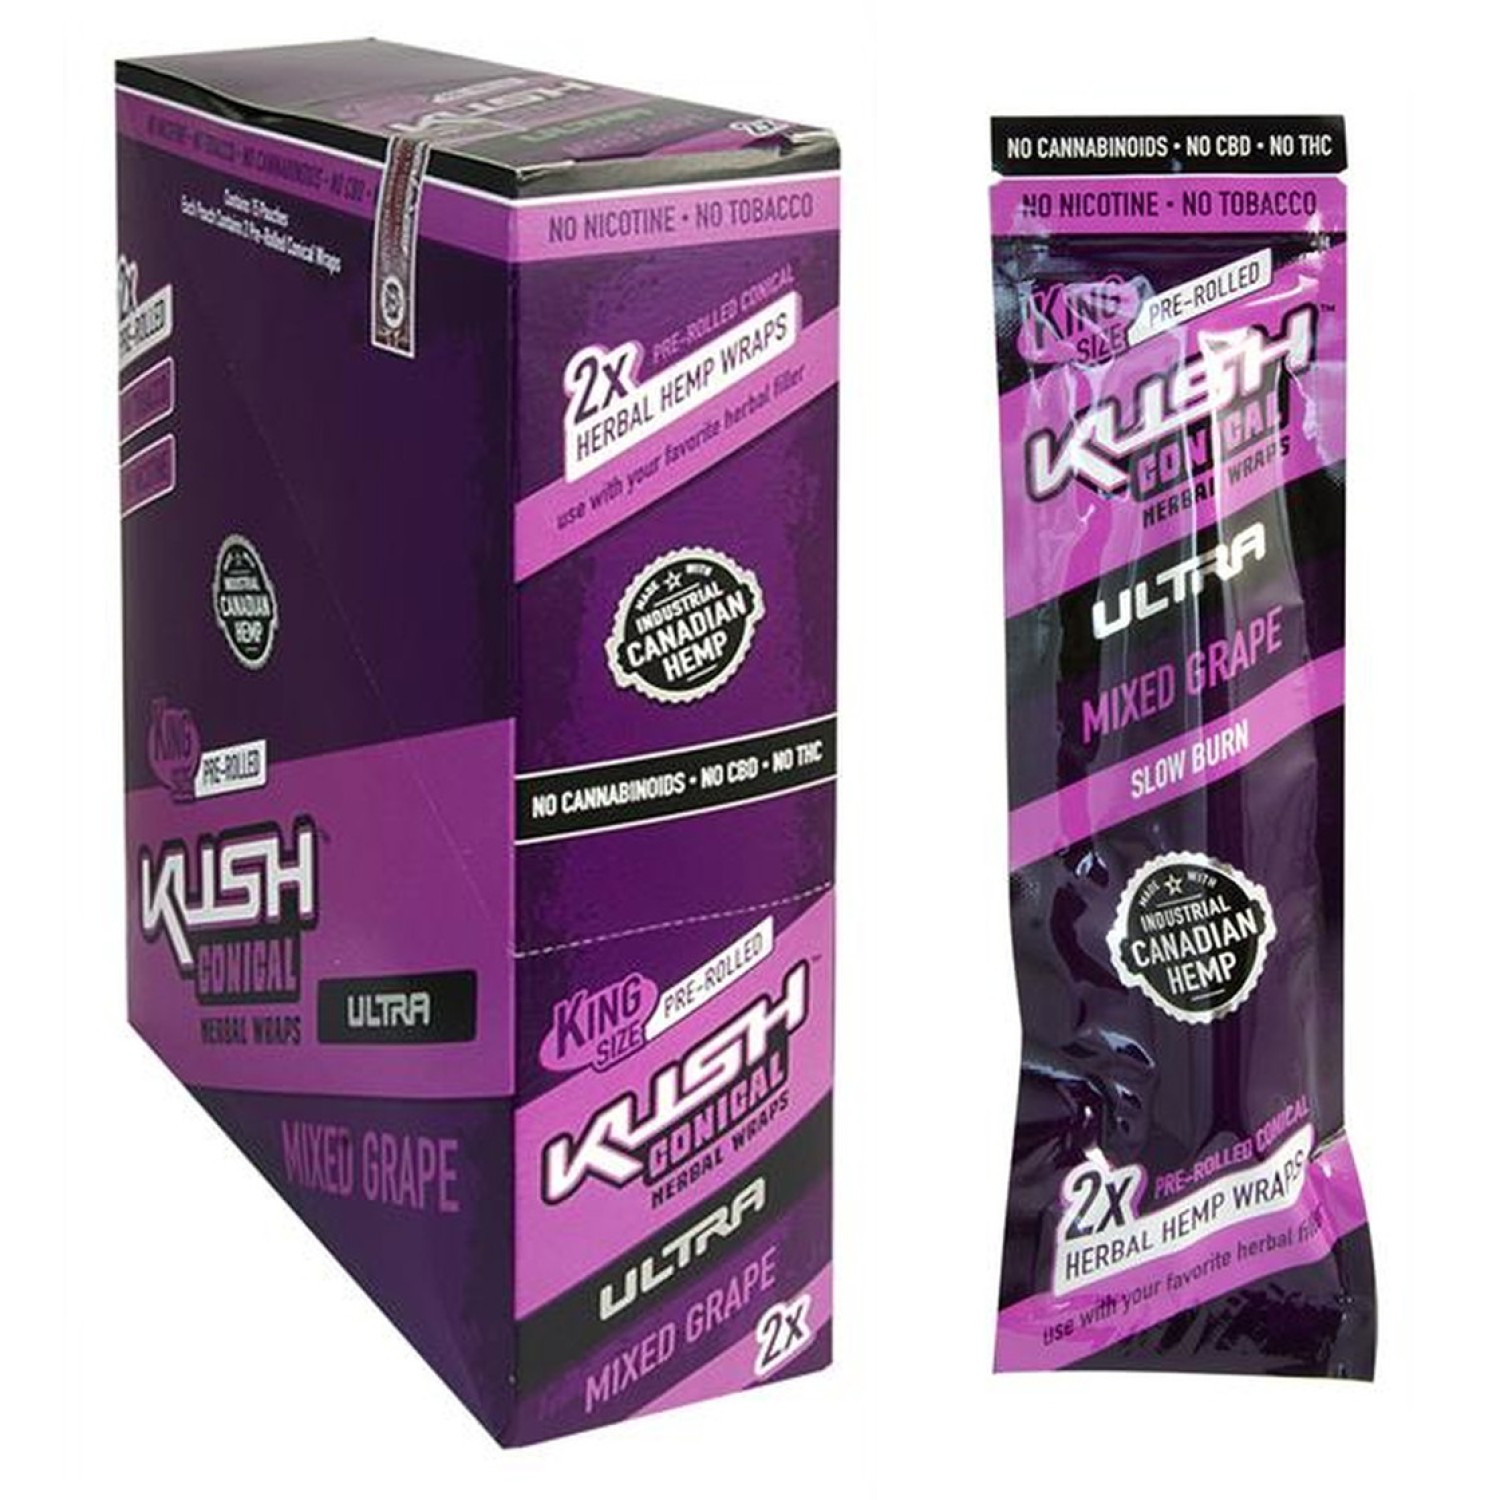 Mix Grape - Kush Ultra Conical Herbal Wraps King Size - Double Cones 15er Box